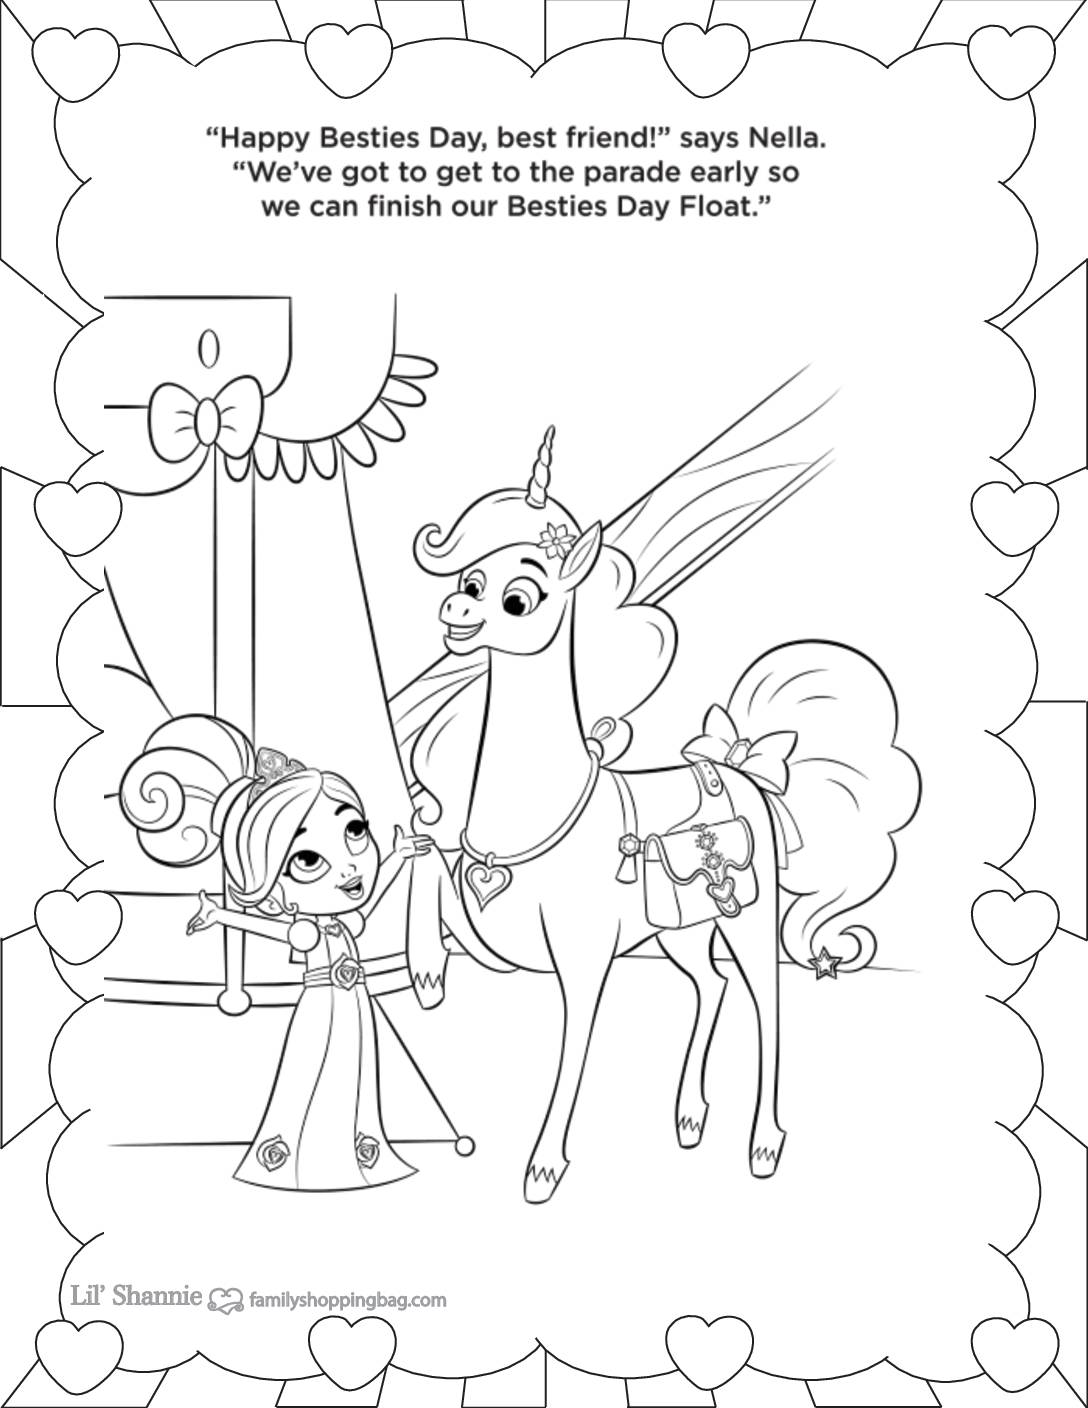 Coloring Page 7 Nella Knight Coloring Pages